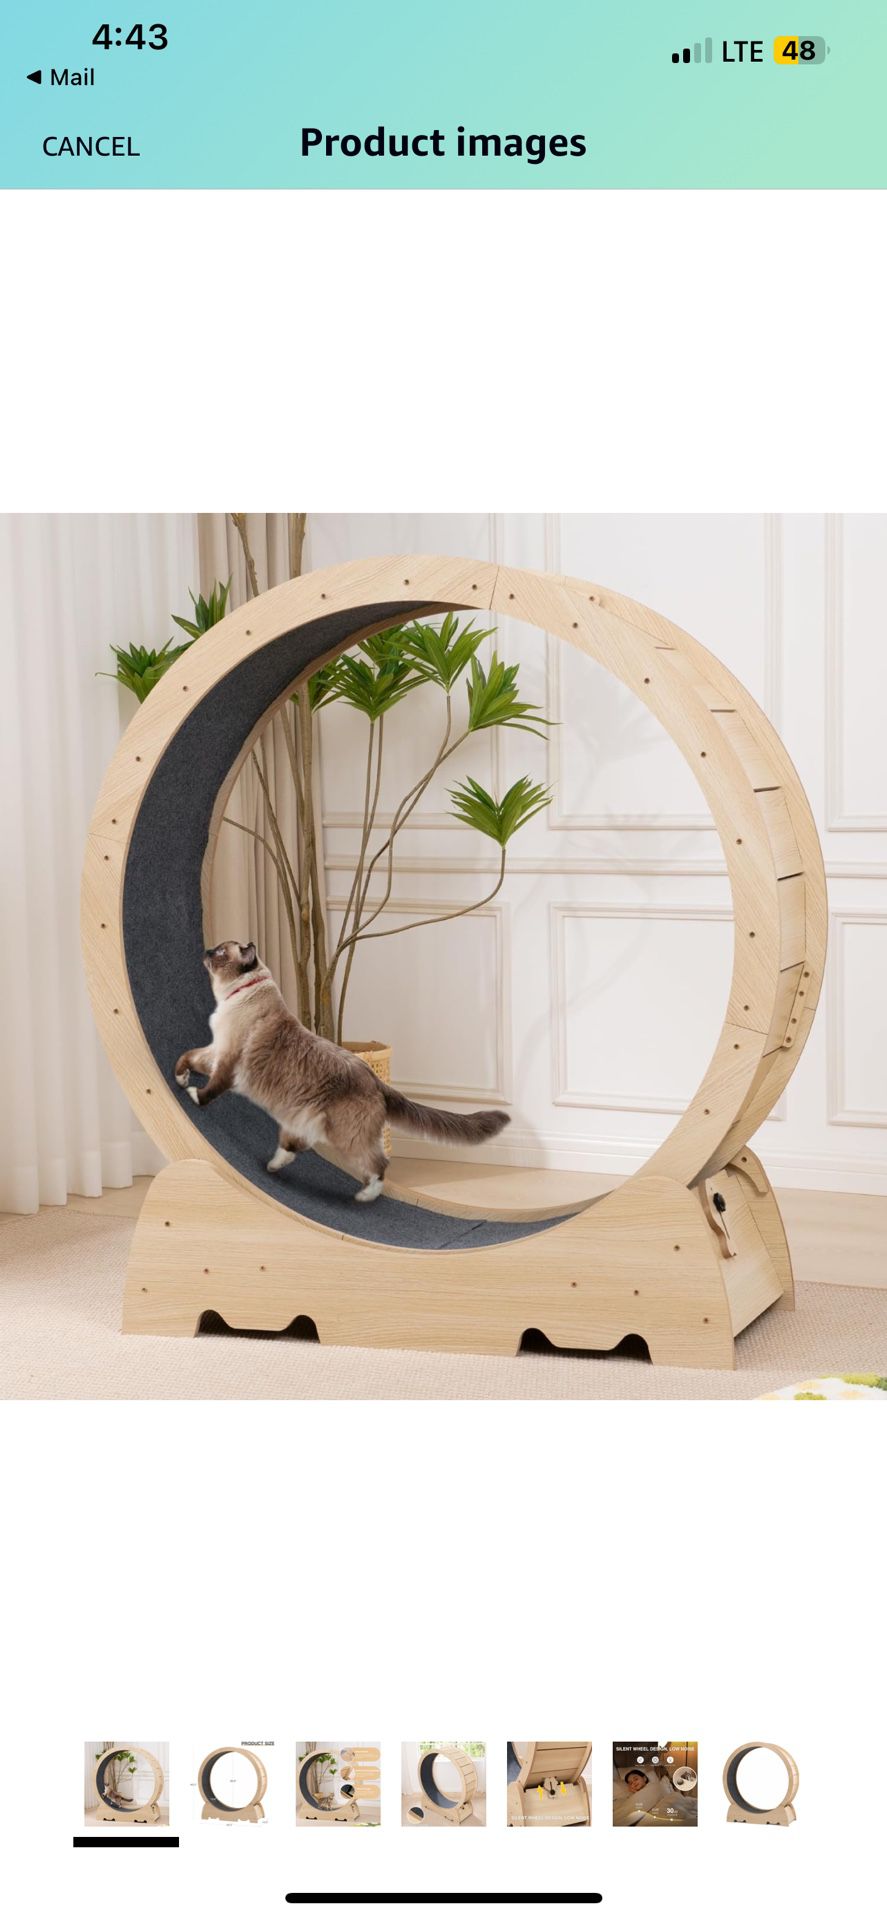 EXQ Home Cat Exercise Wheel for Indoor Cats, Diameter 39.4" Running Wheel with Locking Mechanism, Sturdy Noiseless Treadmill Roller with Carpeted Runw